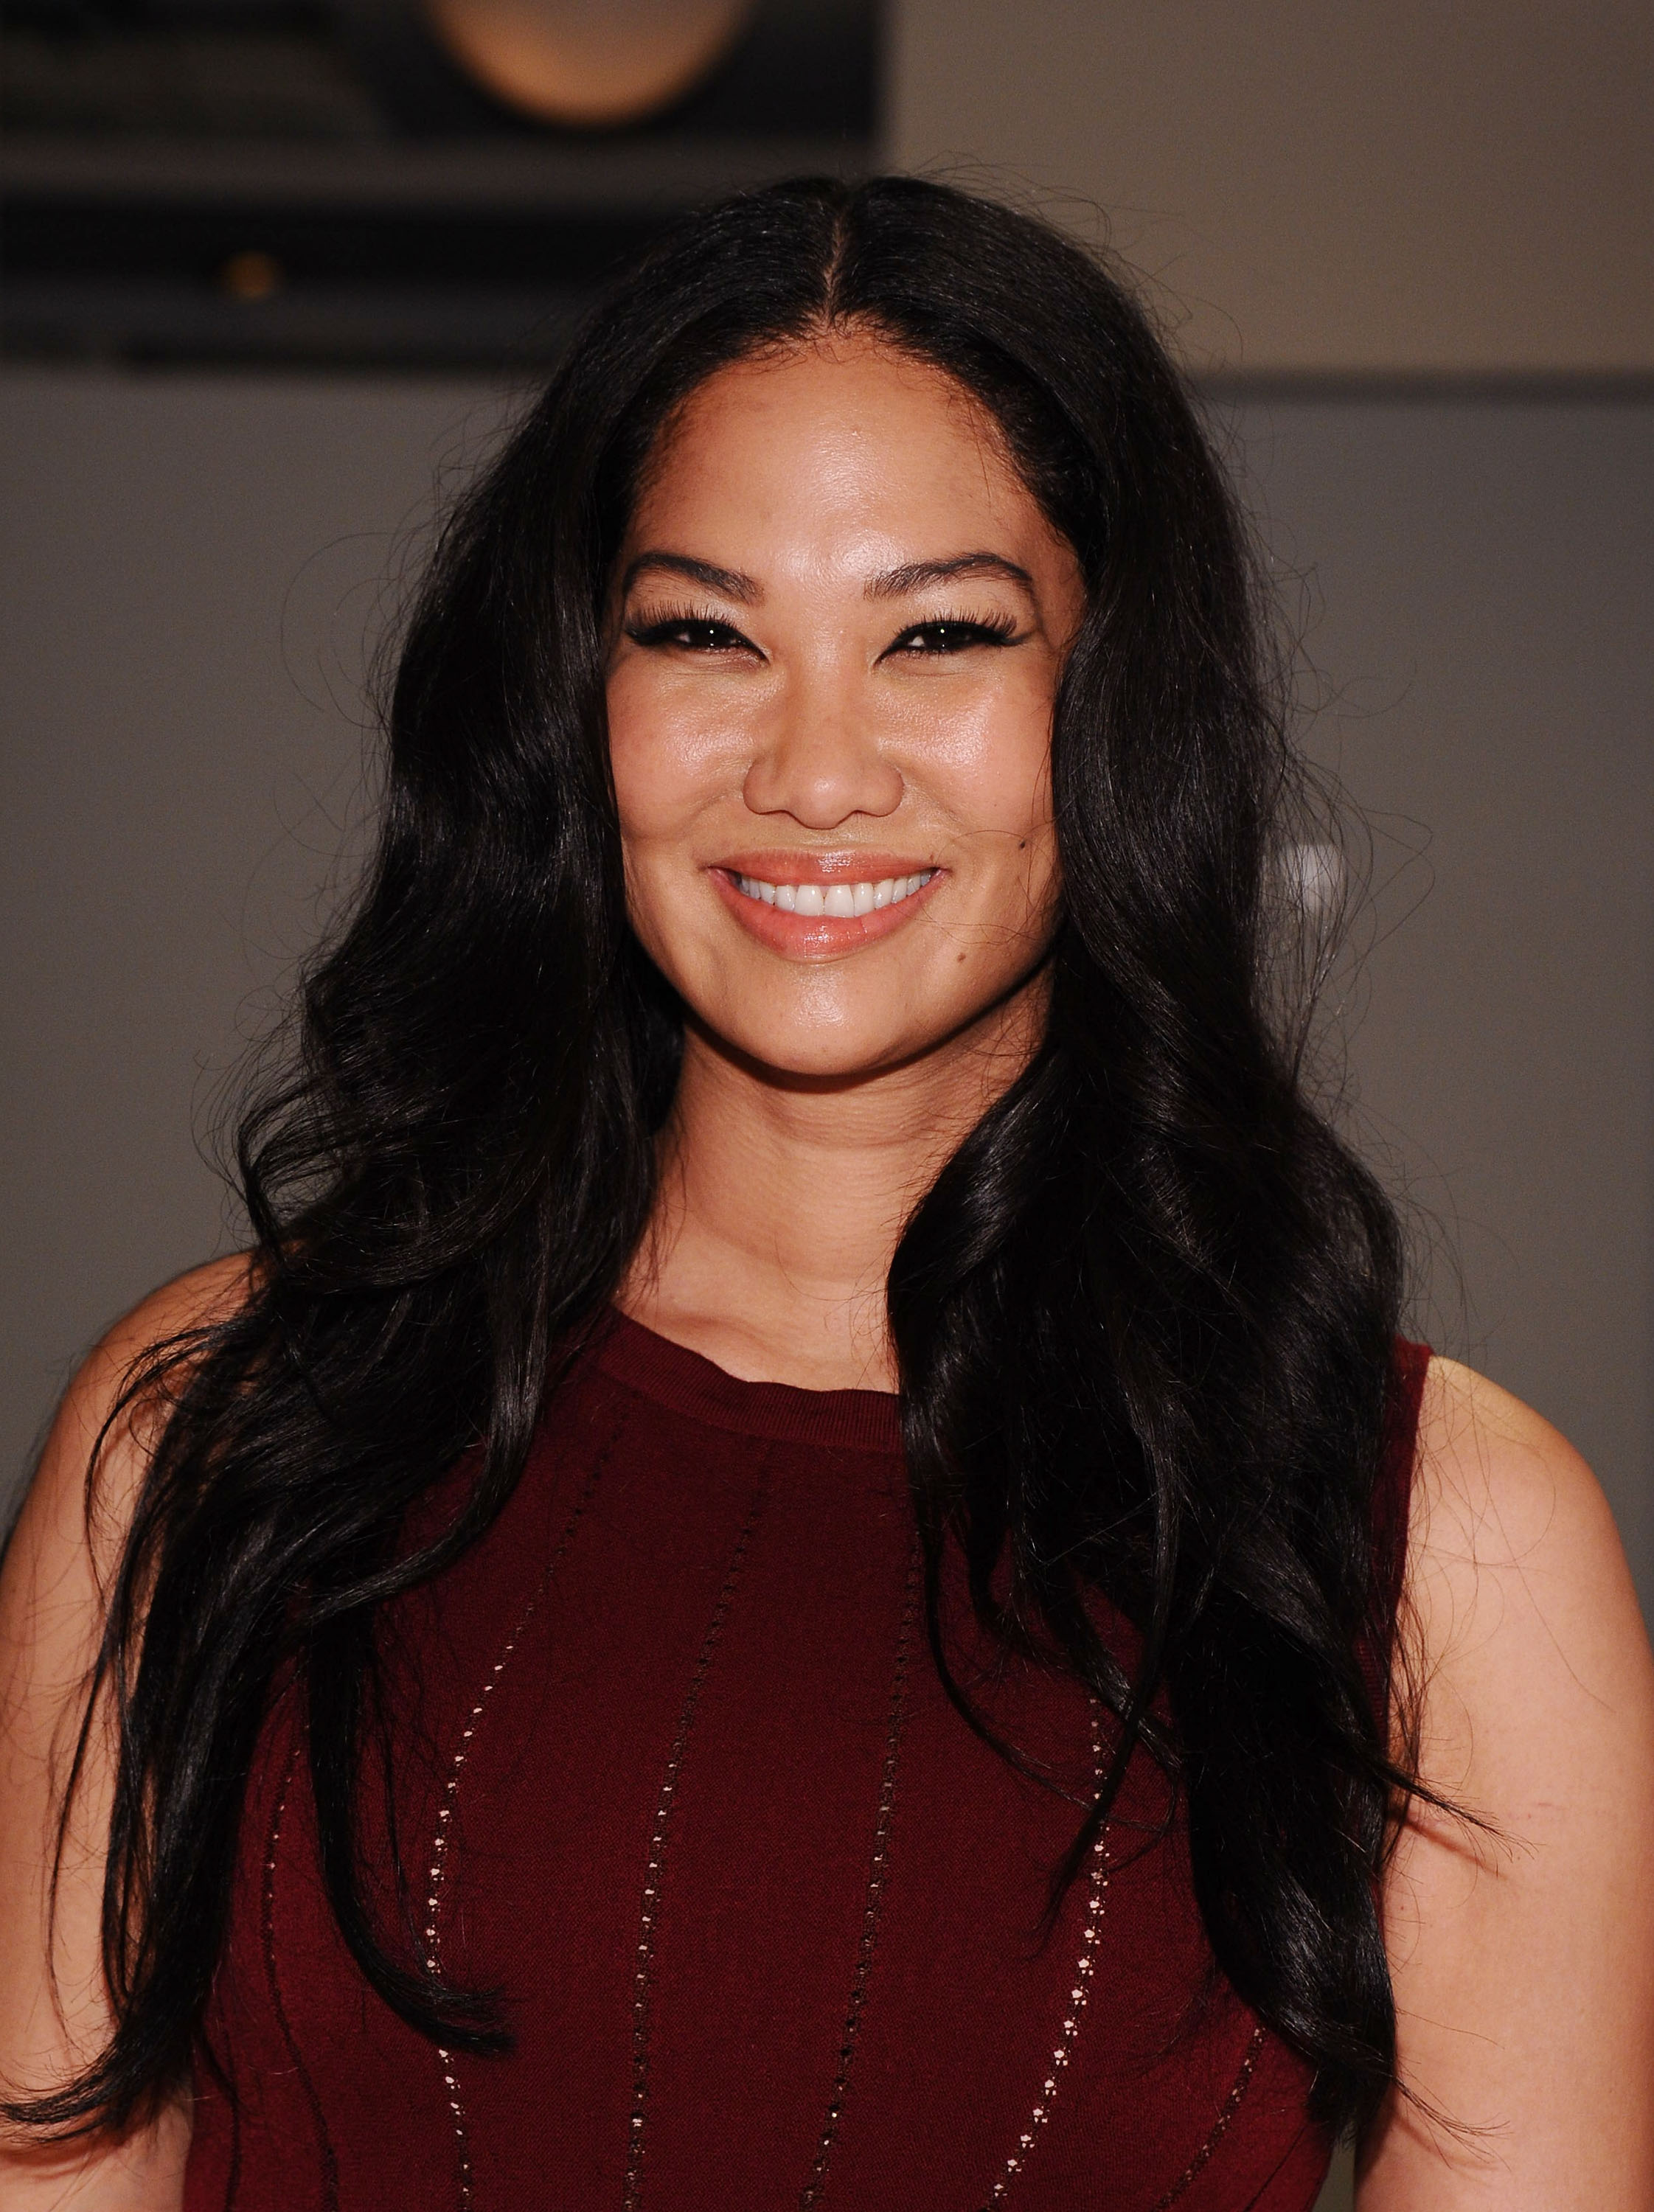 Kimora Lee Simmons at the Mercedes-Benz Fashion Week Spring 2015 at Helen Mills Event Space on September 5, 2014 in New York City | Photo: Getty Images